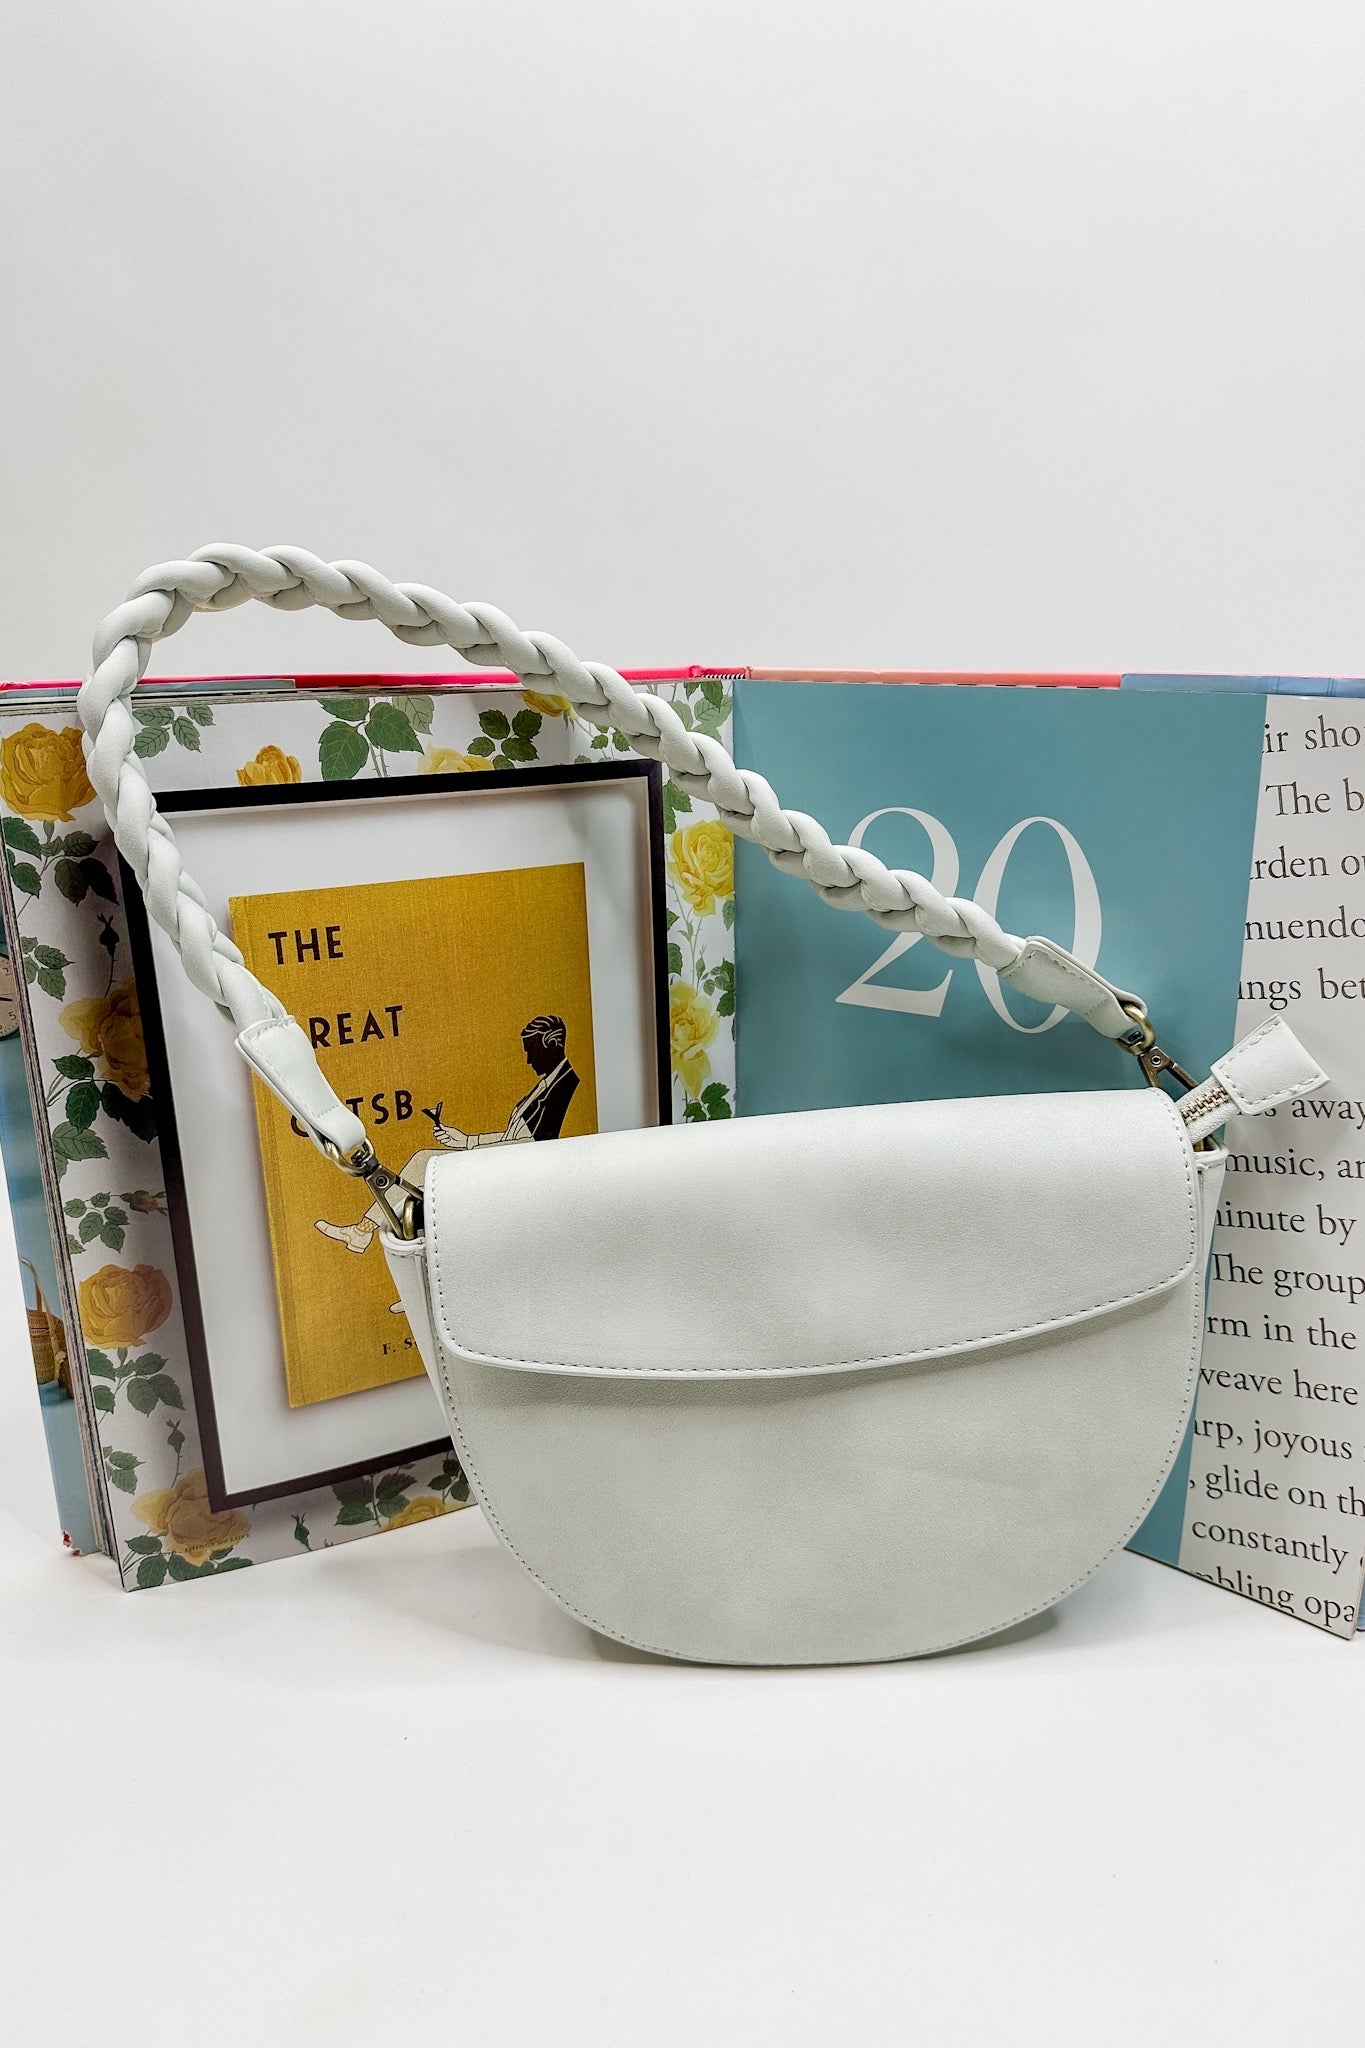 The Luna Crescent Crossbody in White by Joy Susan